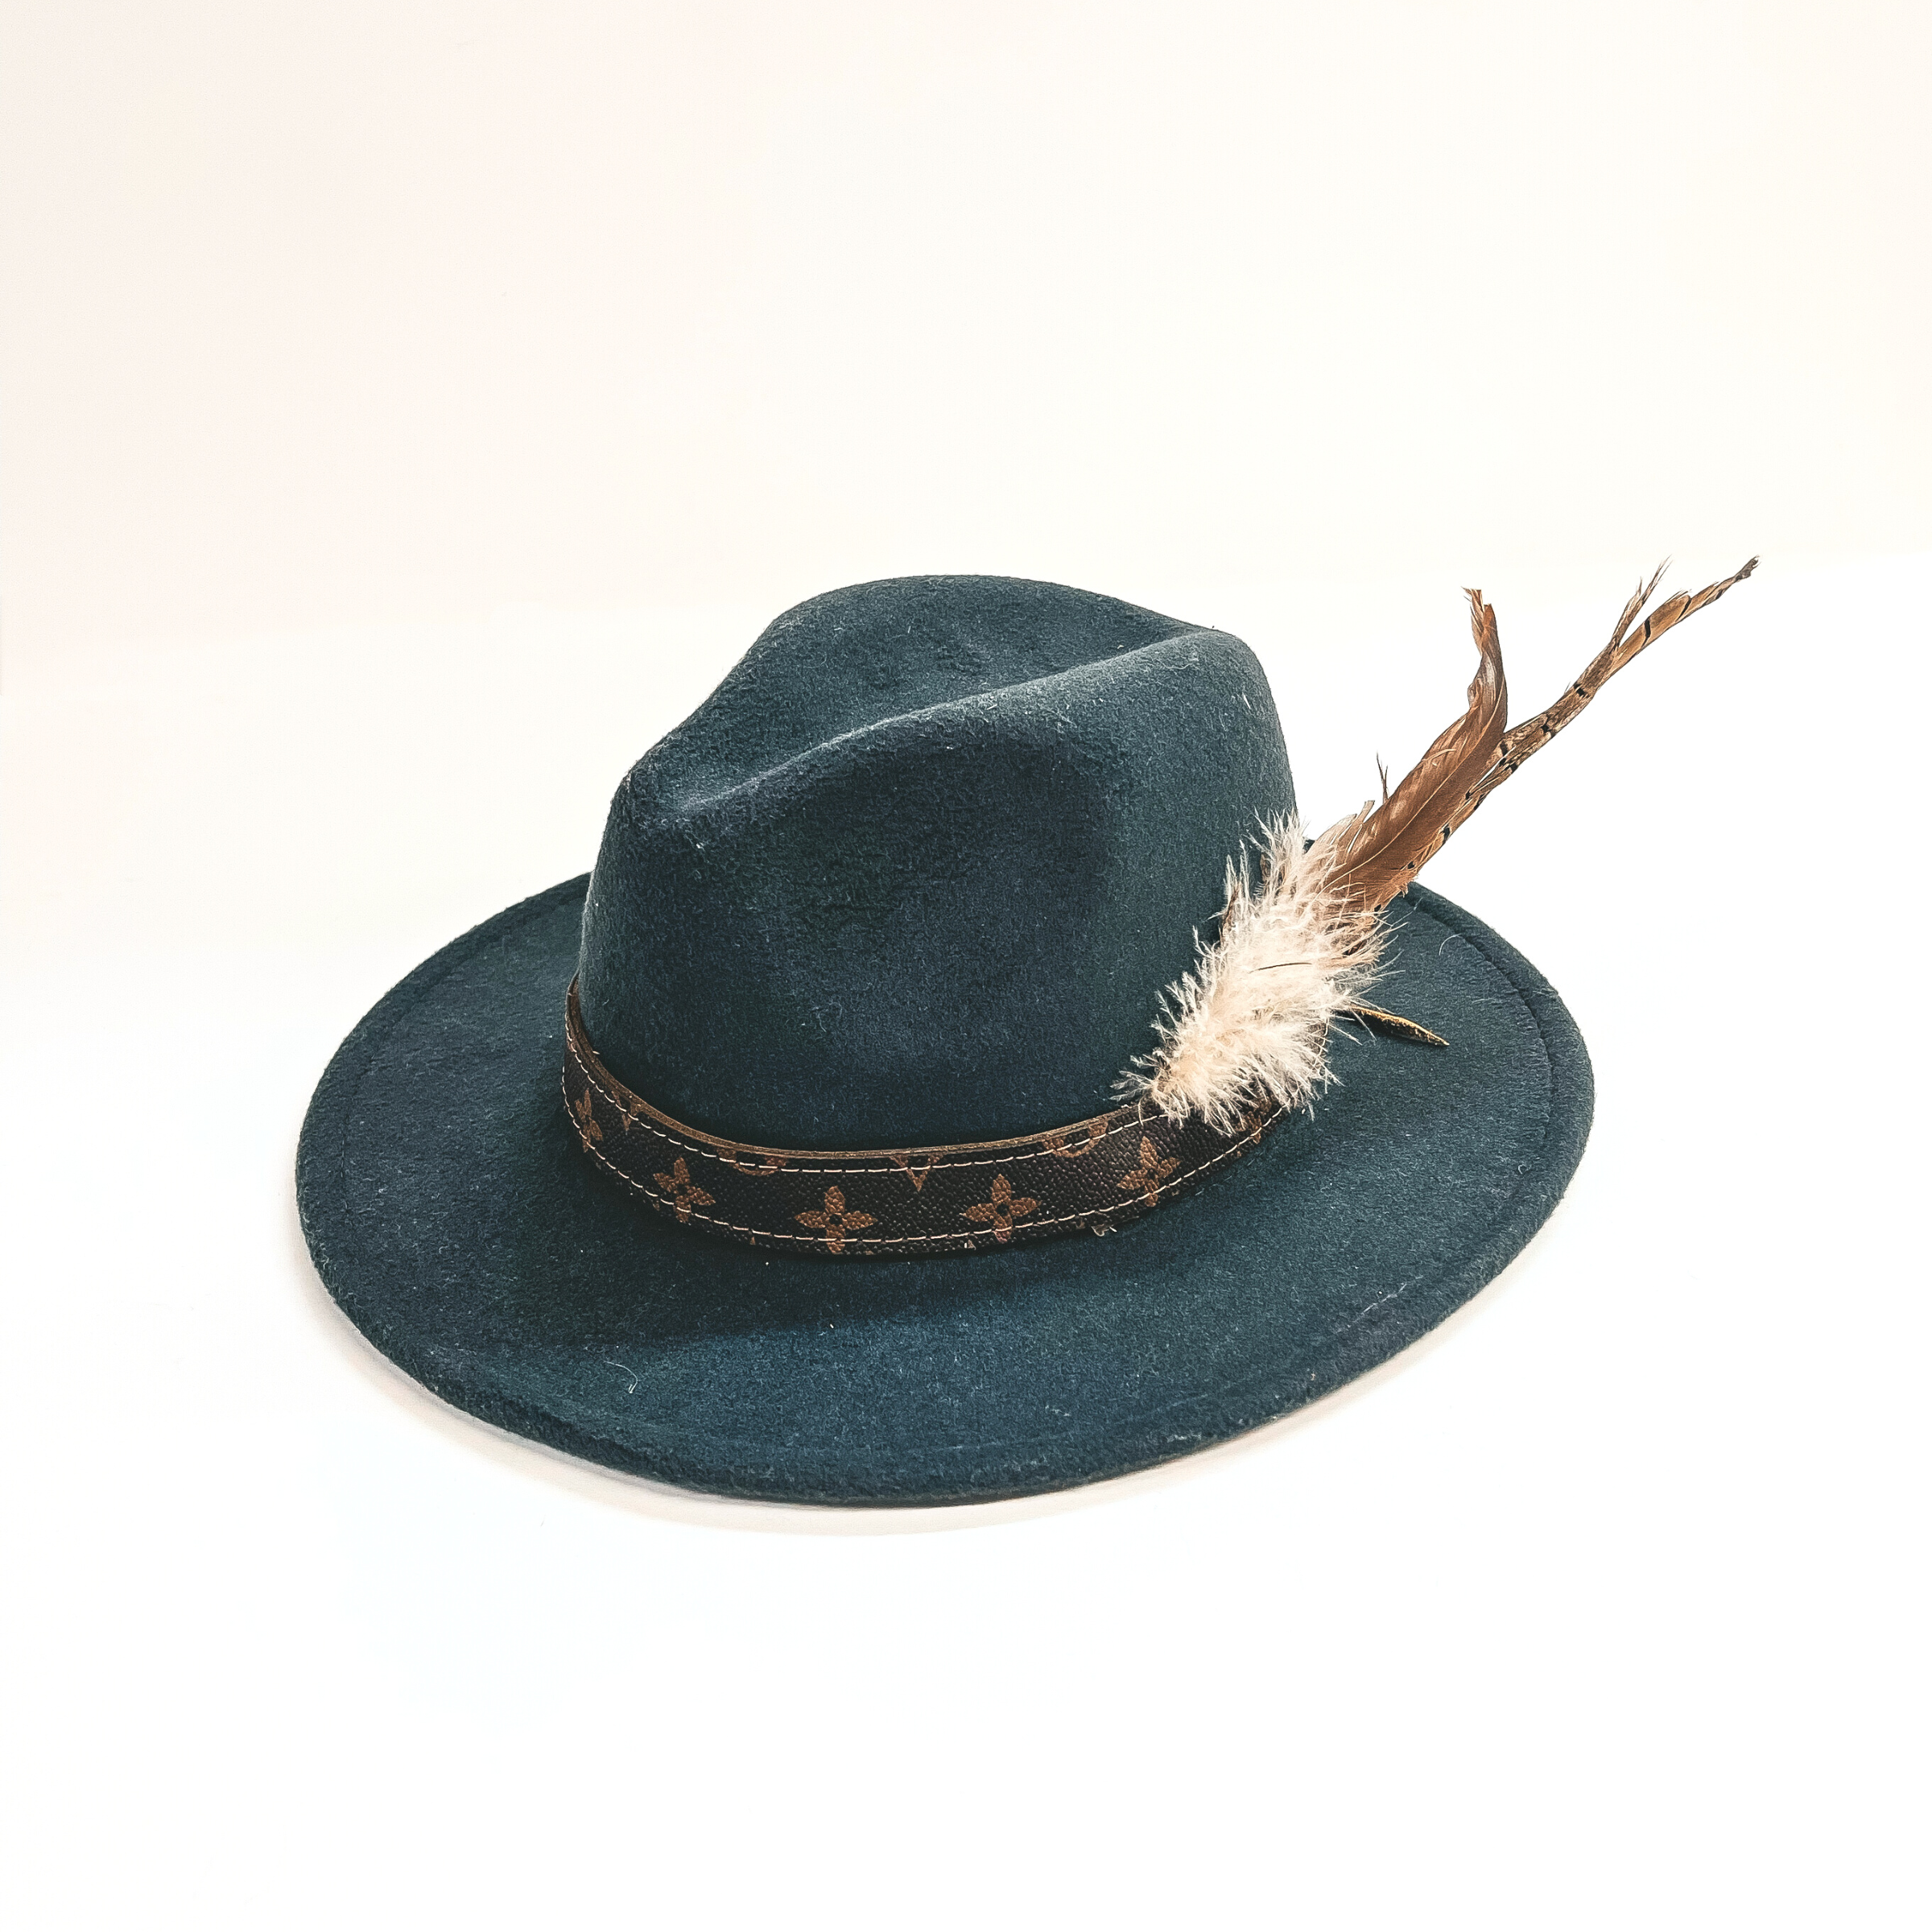 Charcoal gray fedora hat with a brown leather hand band and feathers in the side as accessories. This hat is taken on a white background.